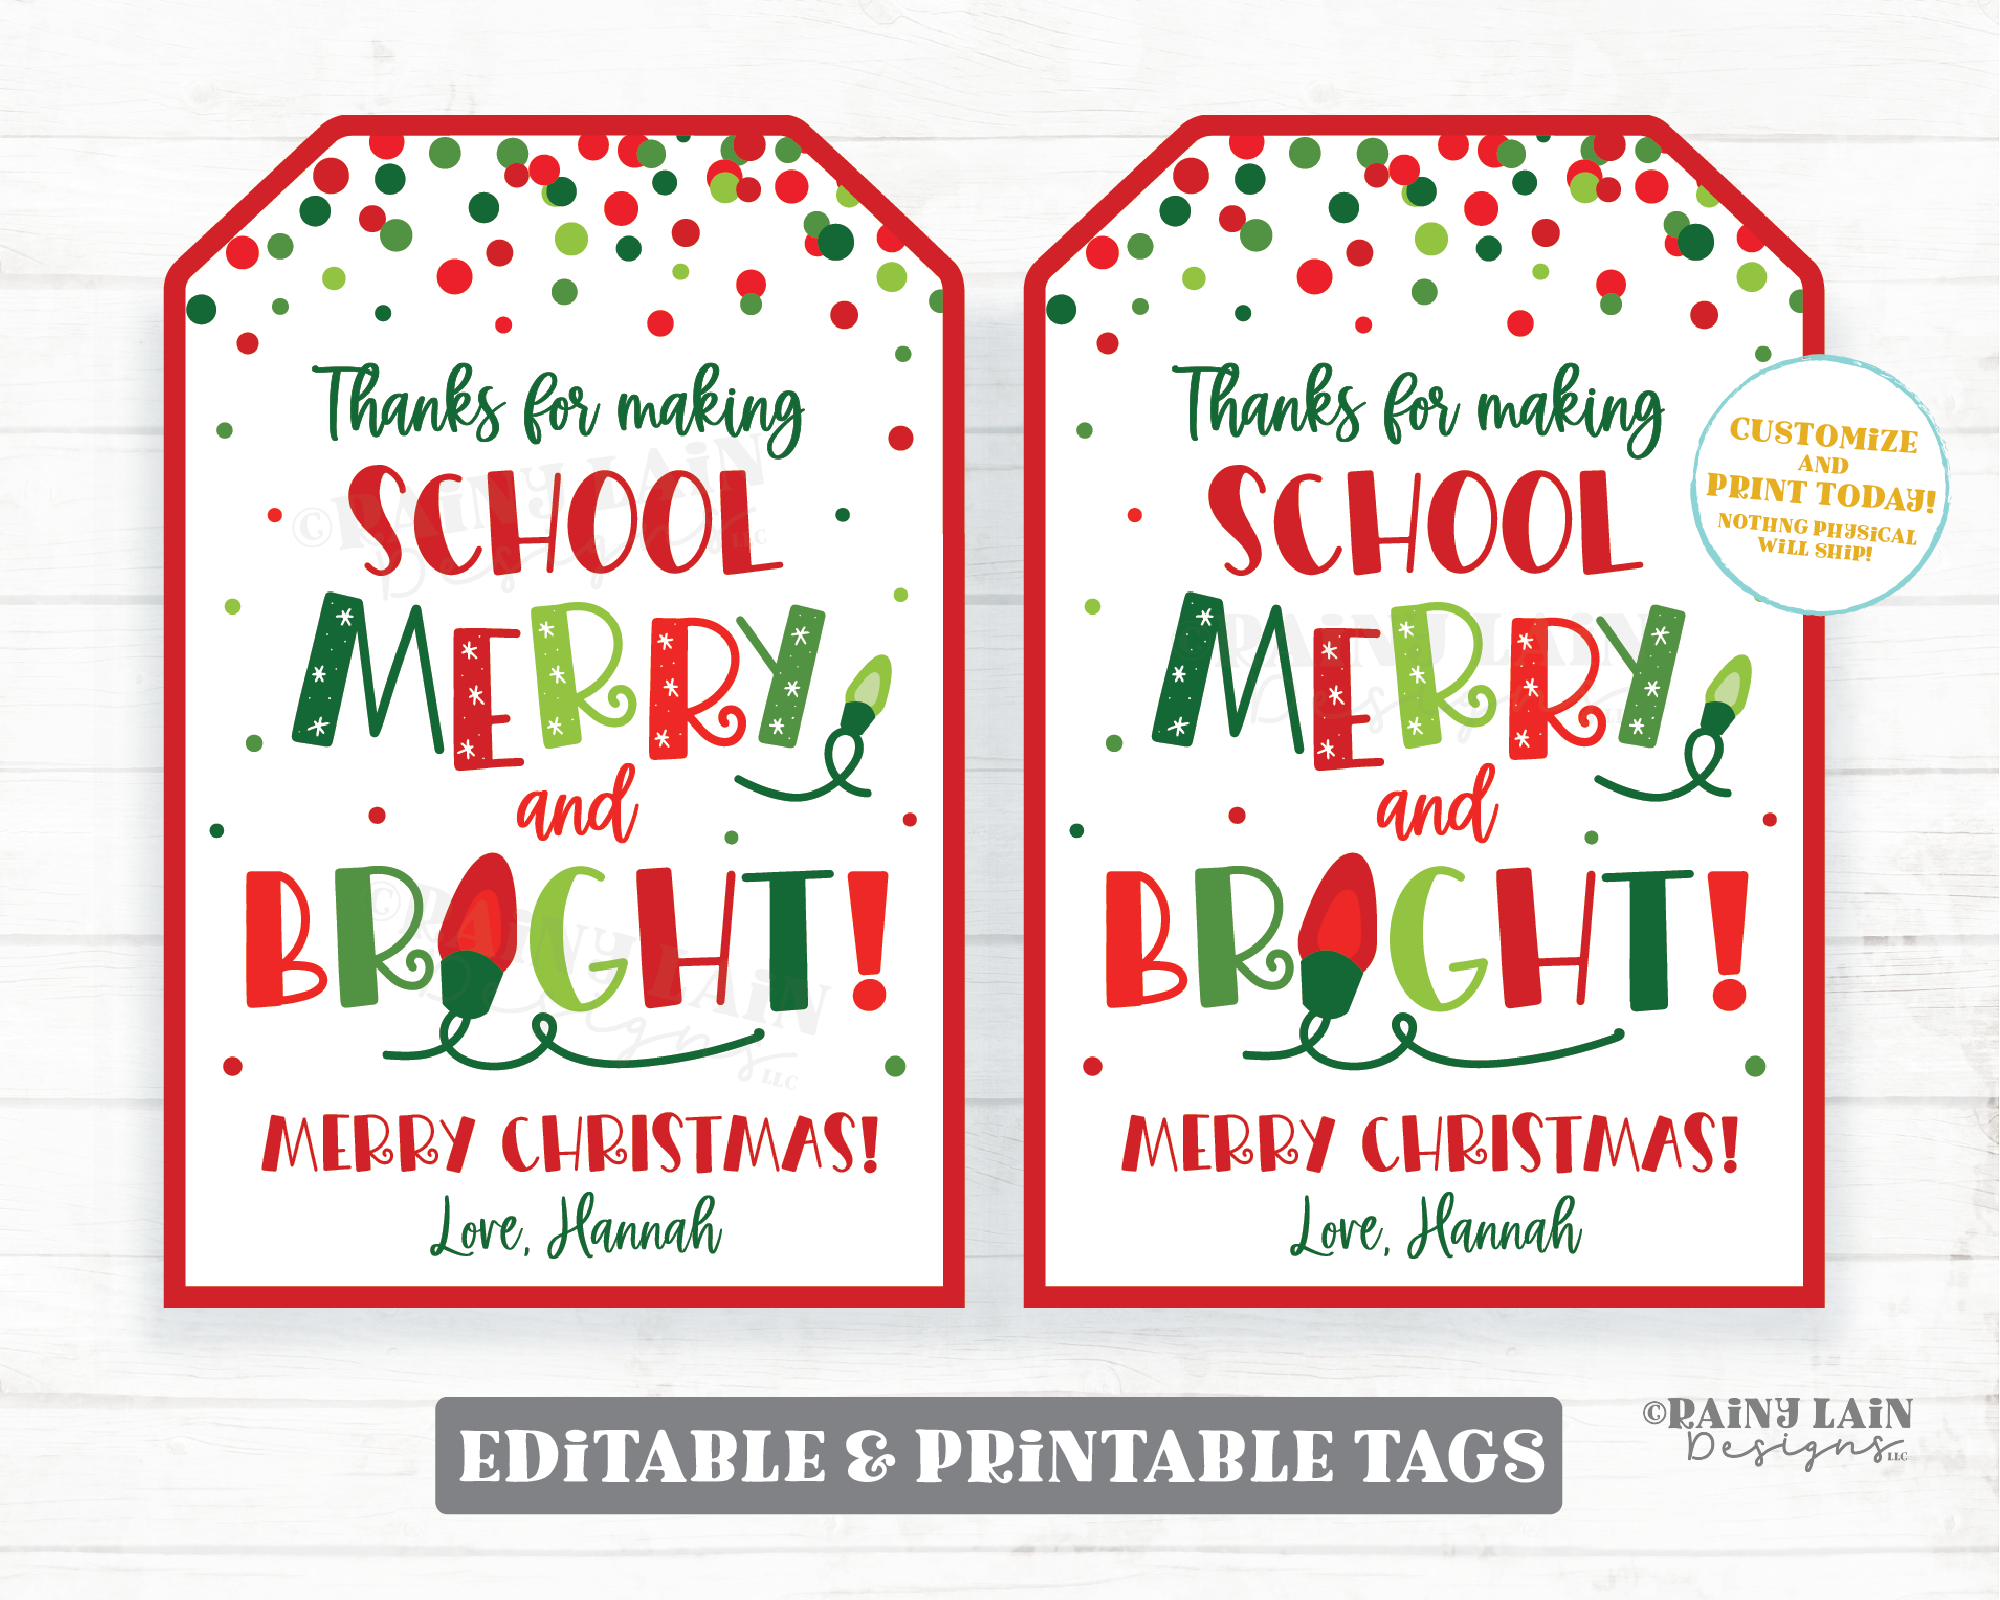 Thanks for making school Merry and Bright Tag Holiday Tag Christmas Gift Appreciation Favor Treat Sweet Staff Teacher Principal PTO Exchange